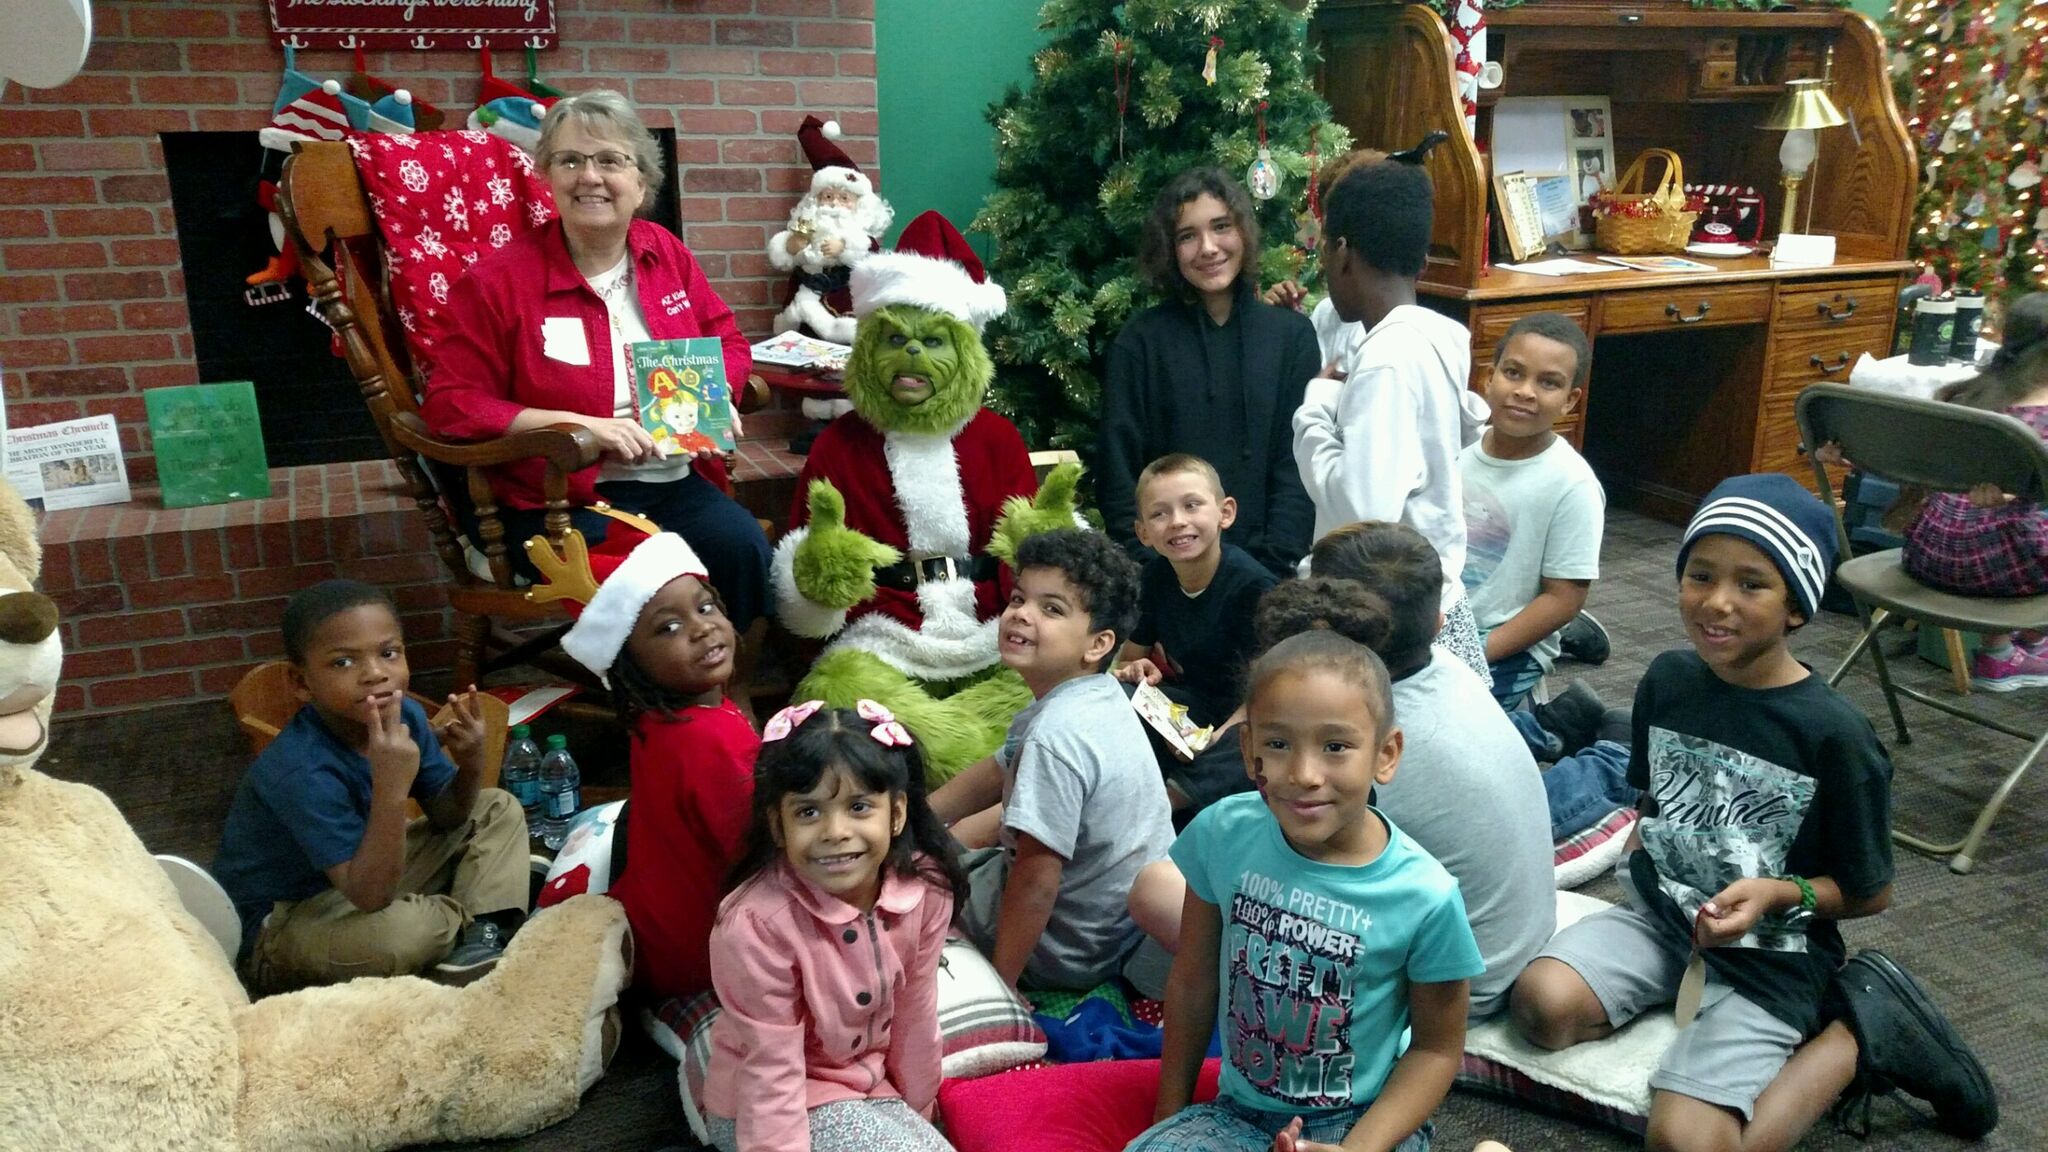 Arizona Superintendent of Public Instruction and costumed Grinch with kids in front of a Christmas tree.